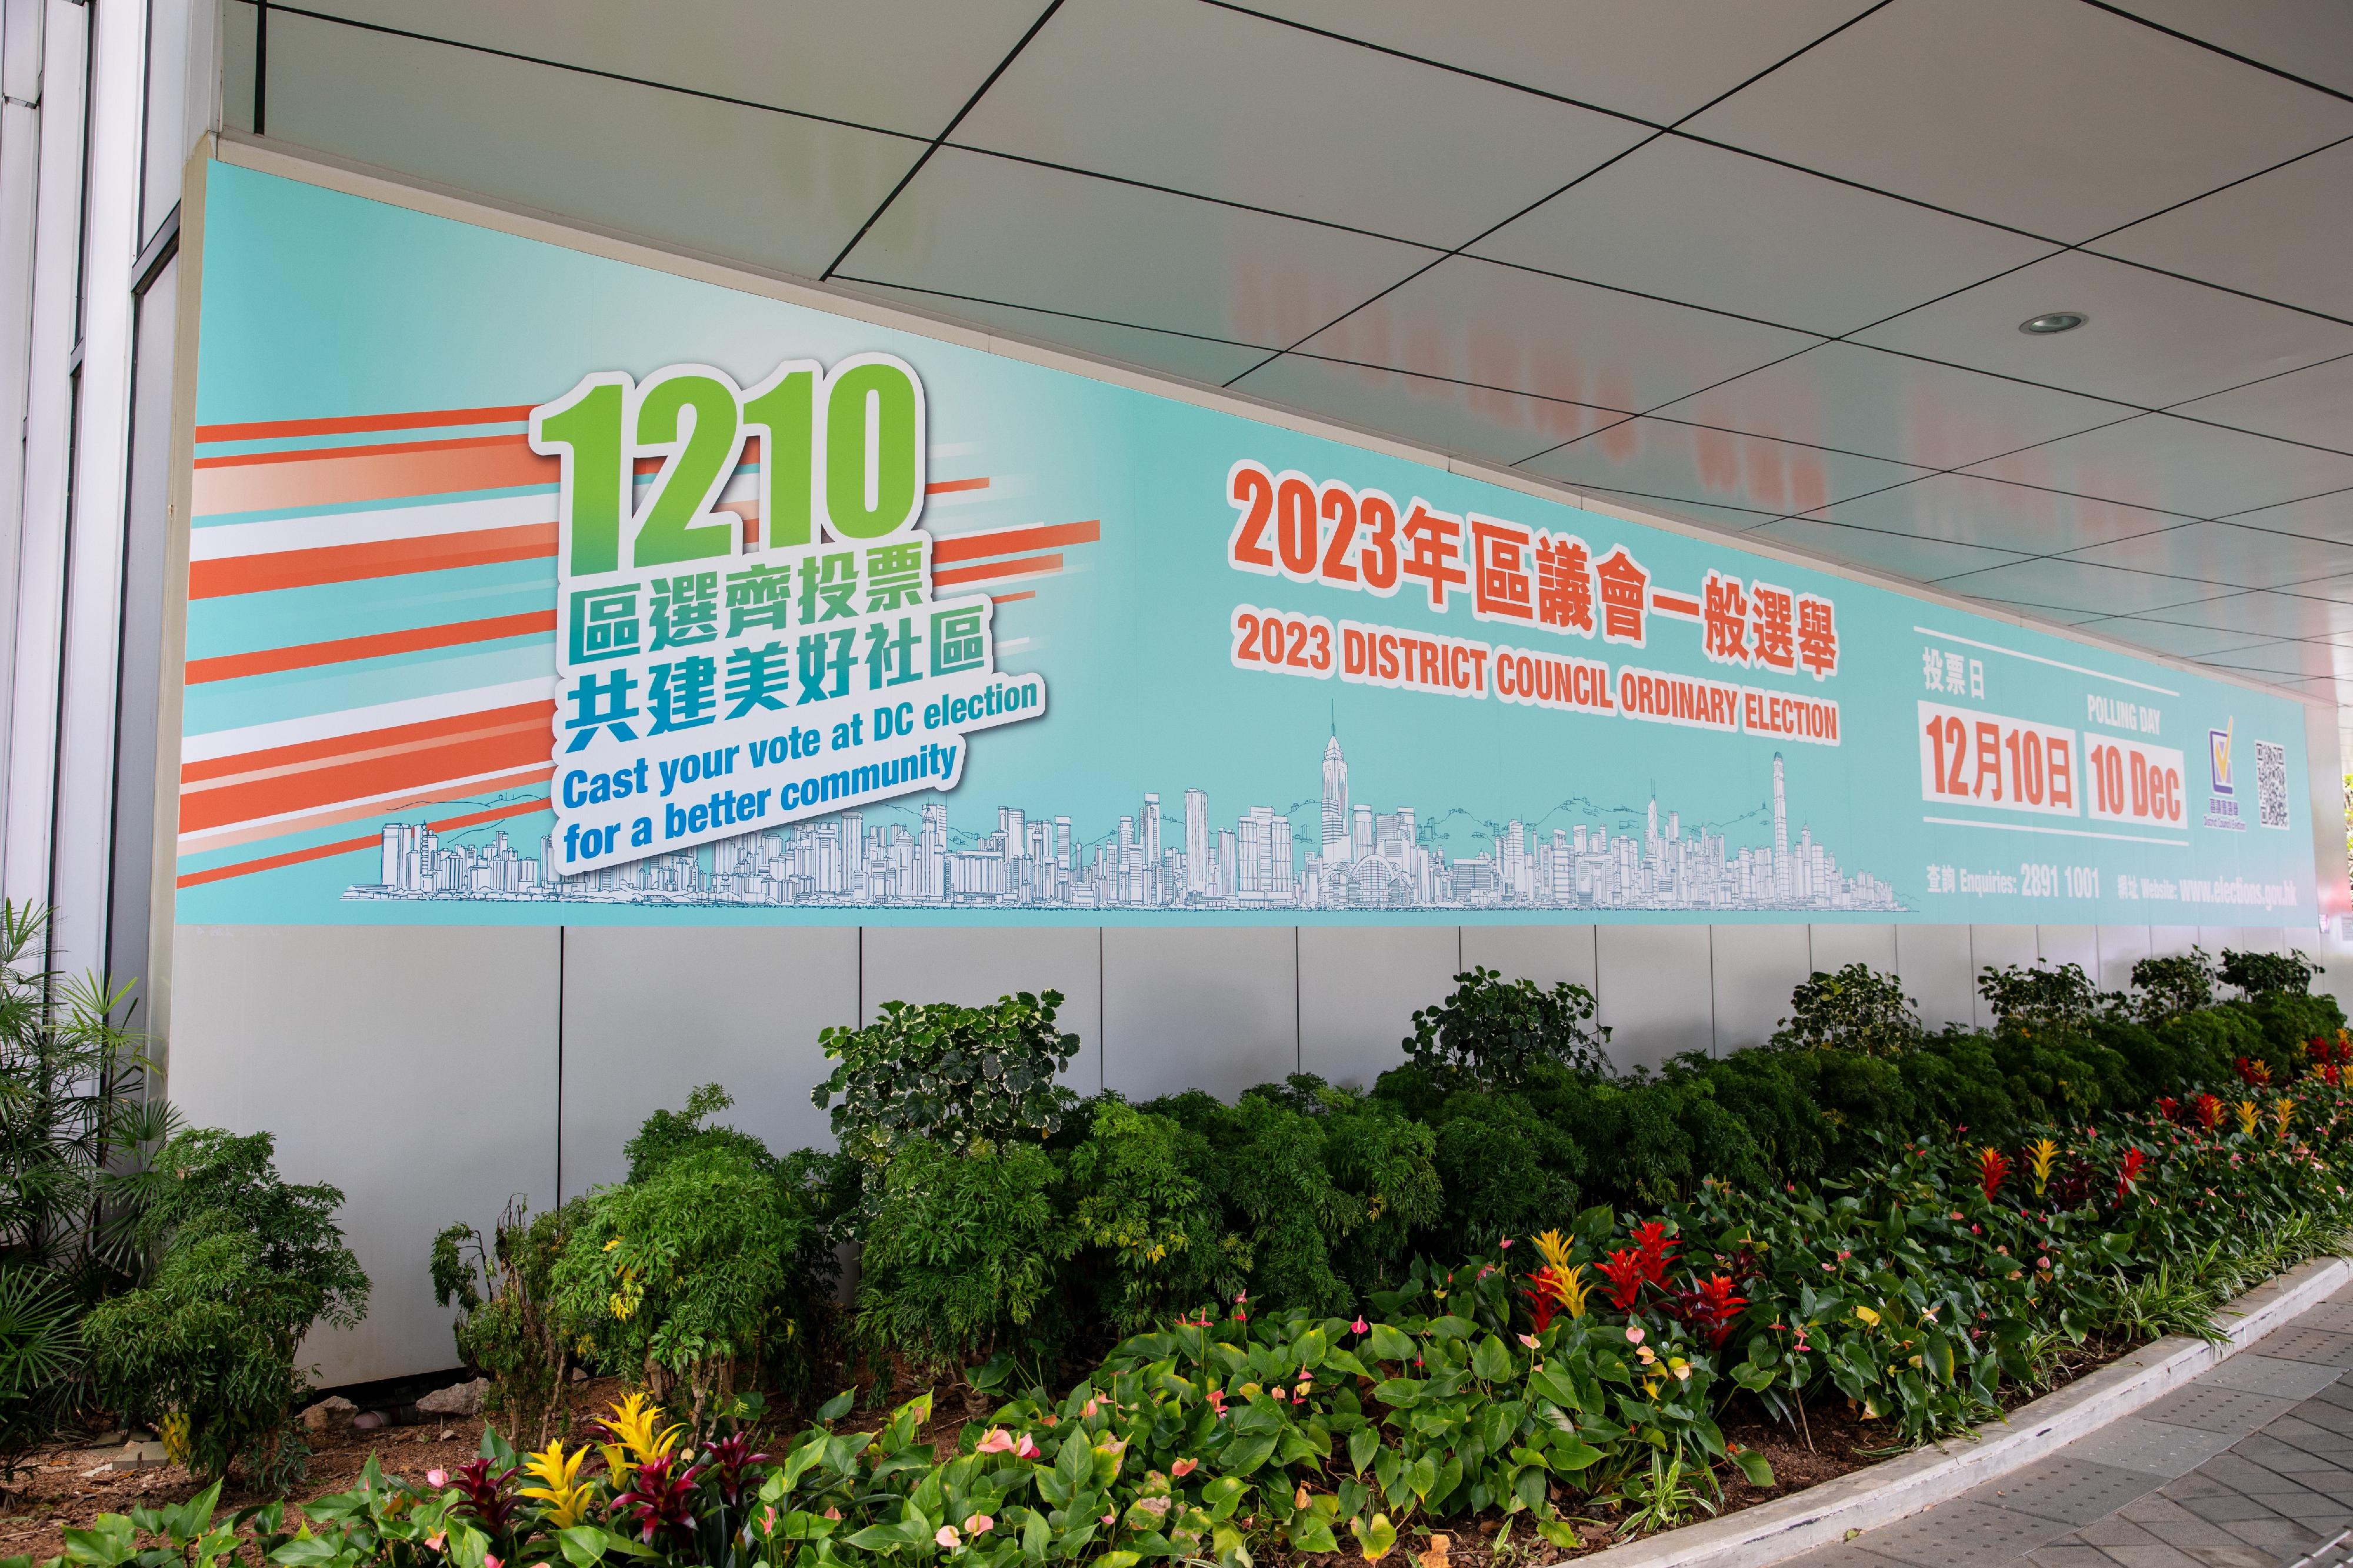 The 2023 District Council Ordinary Election will be held on December 10 (Sunday). The Government has launched a publicity campaign for the polling day that includes displays of giant banners in different districts.